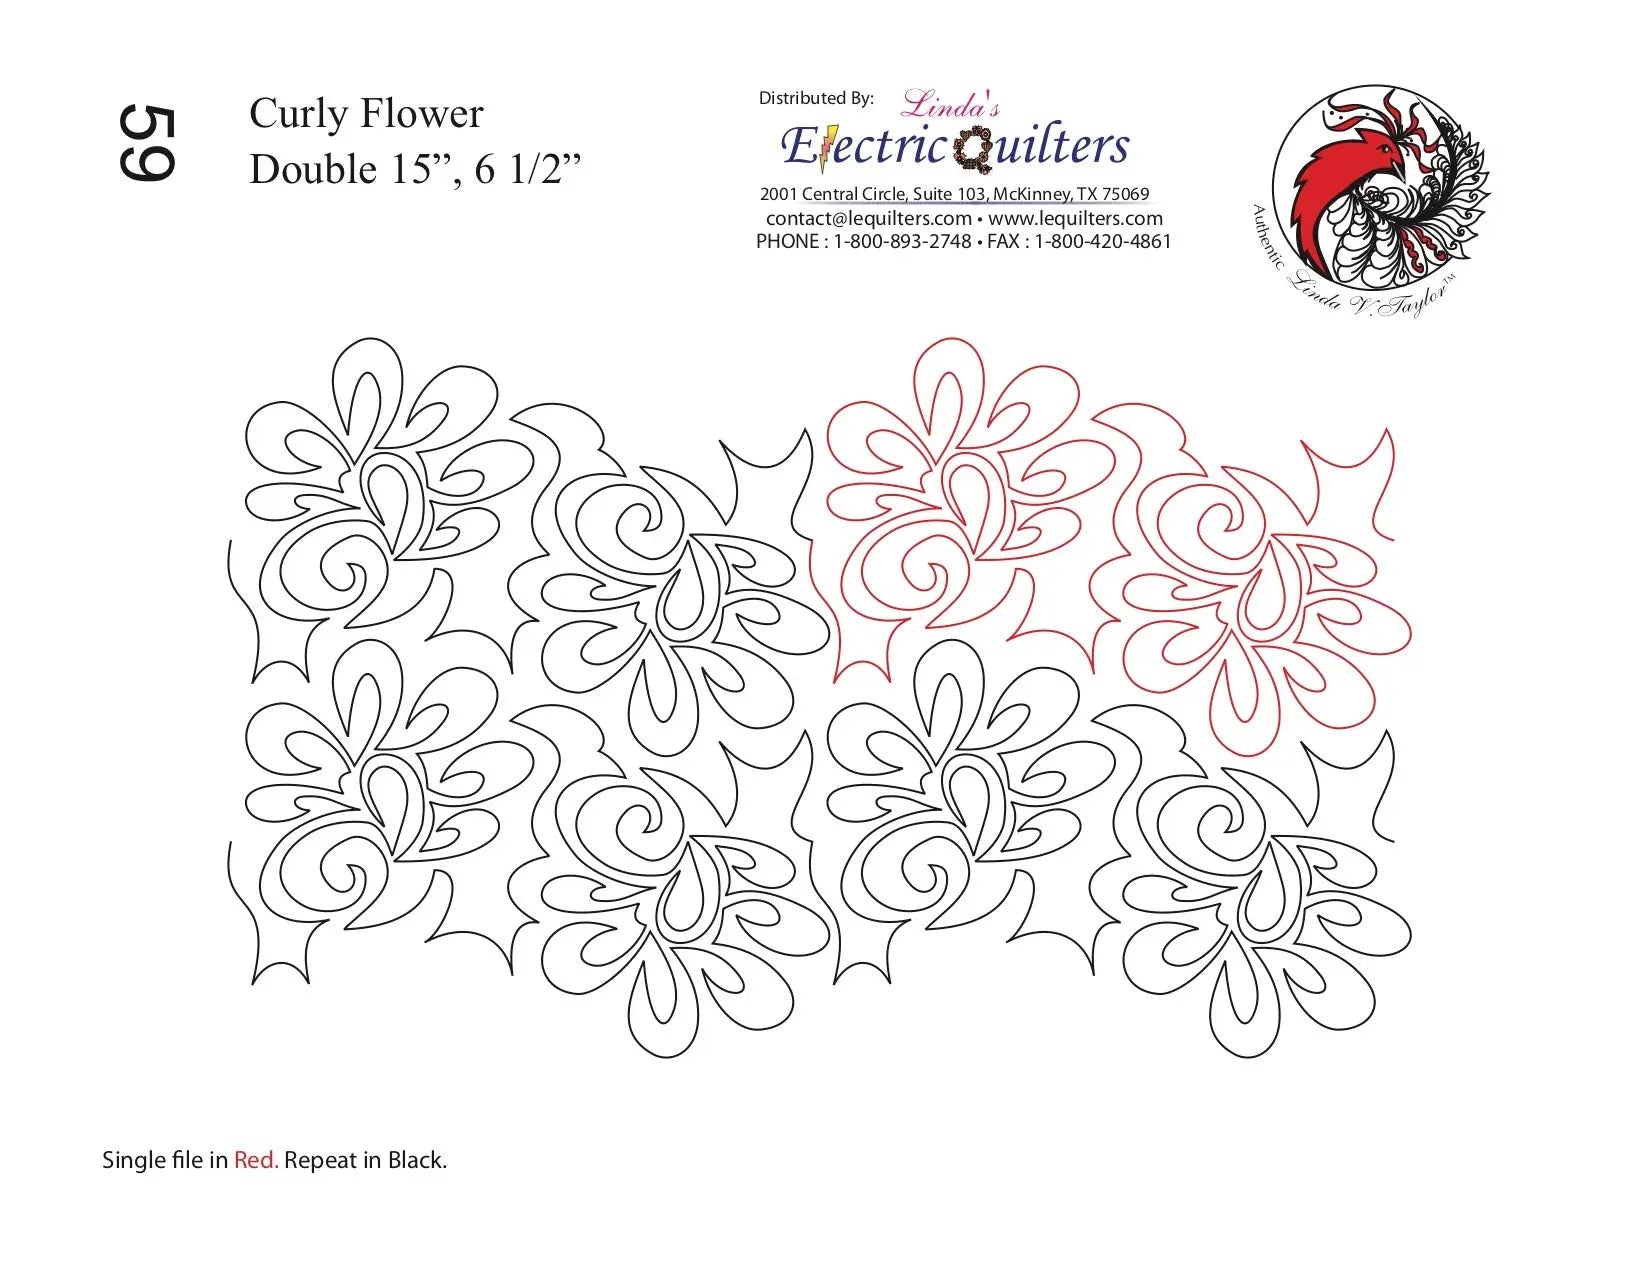 059 Curly Flower Pantograph by Linda V. Taylor - Linda's Electric Quilters